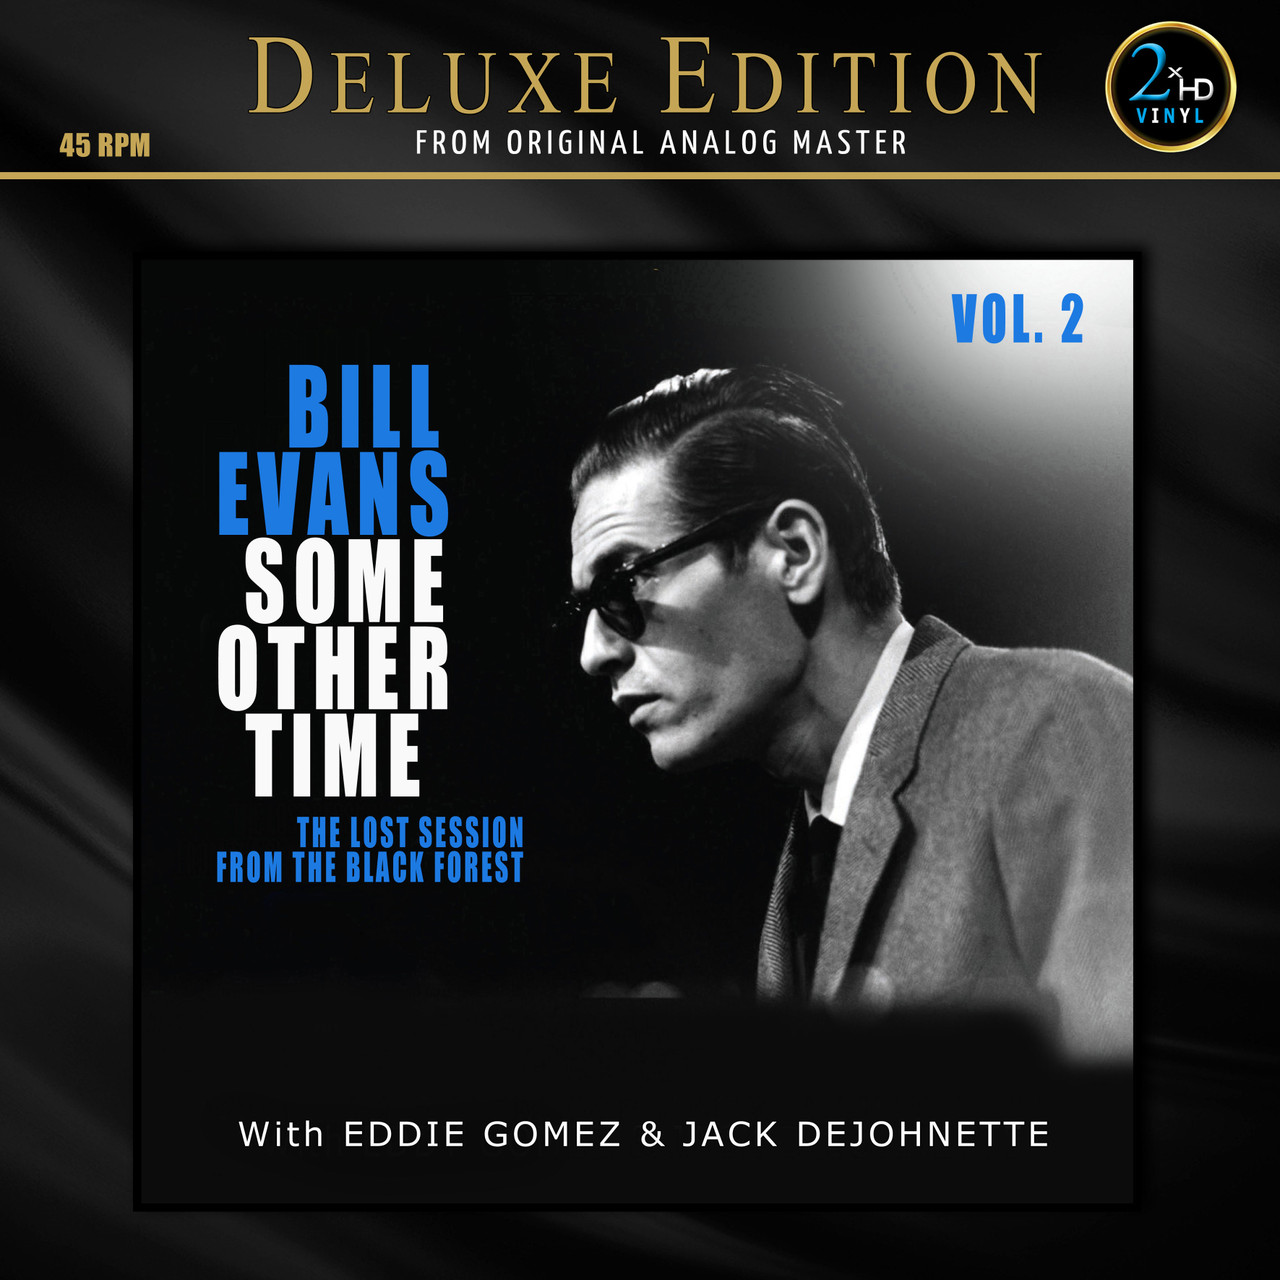 Bill Evans Some Other Time: The Lost Session from the Black Forest Vol. 2  200g 45rpm 2LP